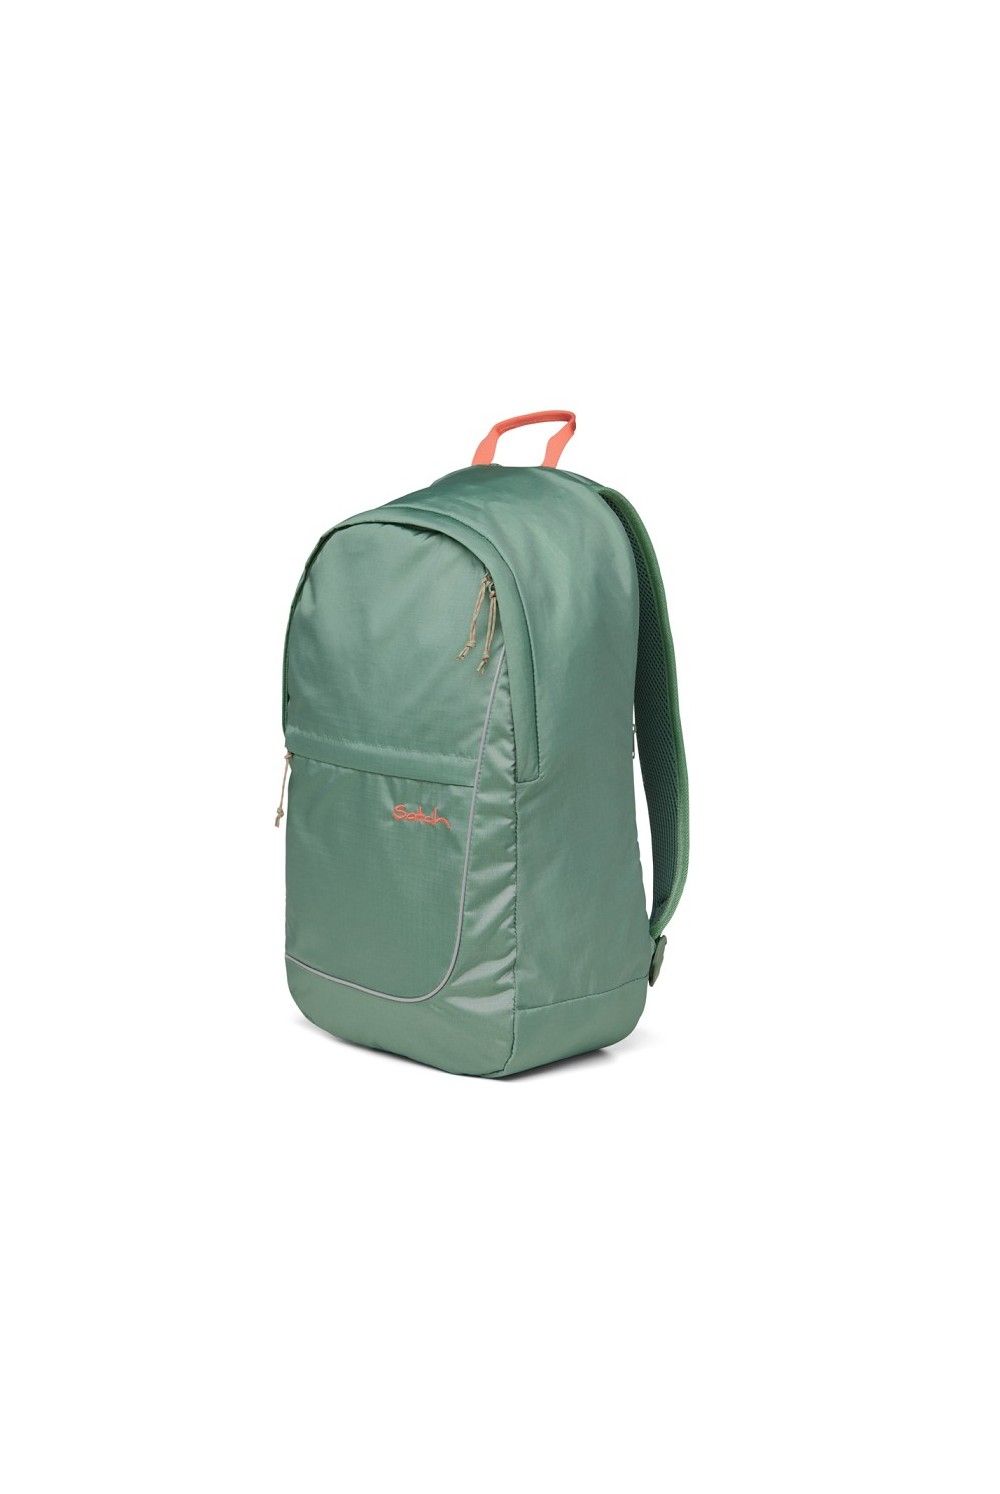 Sac à dos scolaire Satch Fly Ripstop Green